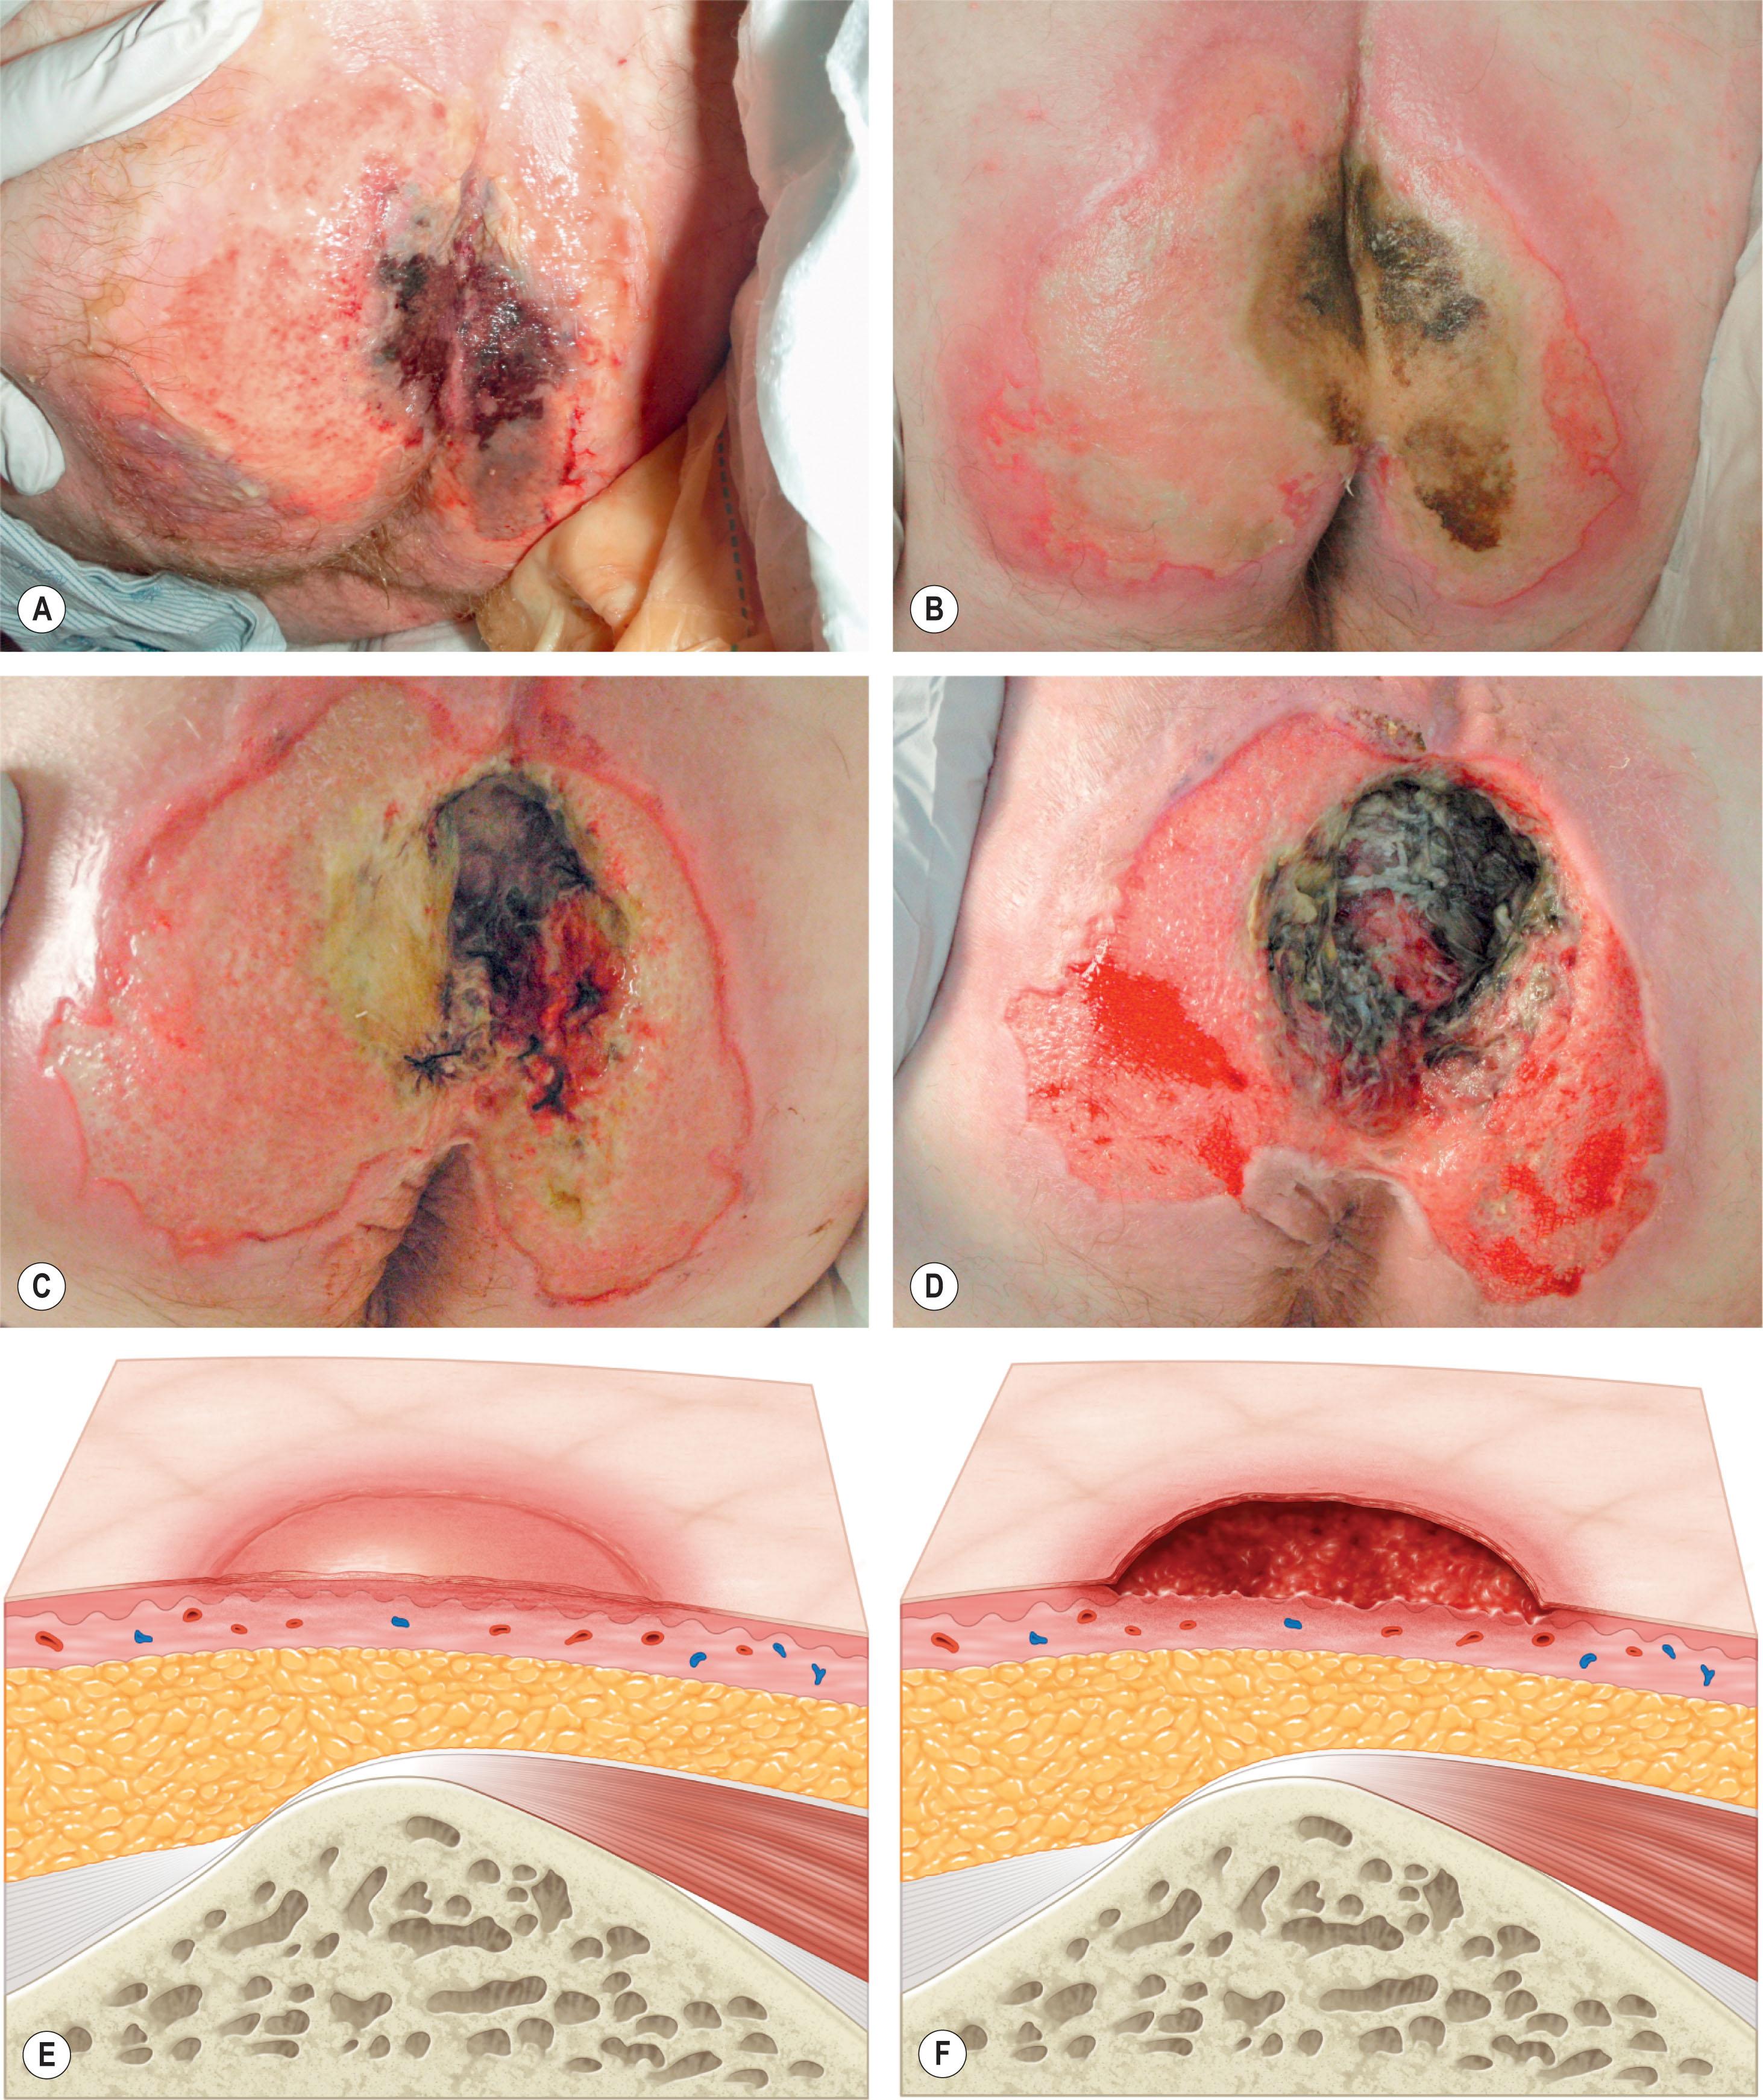 Figure 16.4, The National Pressure Ulcer Advisory Panel staging system. (A,E) Stage I: Intact skin with nonblanchable redness of a localized area usually over a bony prominence. Darkly pigmented skin may not have visible blanching; its color may differ from the surrounding area. (B,F) Stage II: Partial-thickness loss of dermis presenting as a shallow open ulcer with a red pink wound bed, without slough. May also present as an intact or open/ruptured serum-filled blister. This should not be used to describe skin tears, tape burns, perineal dermatitis, maceration, or excoriation. (C,G) Stage III: Full-thickness tissue loss. Subcutaneous fat may be visible, but bone, tendon, or muscle is not exposed. Slough may be present but does not obscure the depth of tissue loss. May include undermining and tunneling. (D,H) Stage IV: Full-thickness tissue loss with exposed bone, tendon, or muscle. Exposed bone is sufficient but not necessary to define a stage IV pressure sore. Slough or eschar may be present on some parts of the wound bed. Often includes undermining or tunneling. May extend into muscle and/or supporting structures (e.g., fascia, tendon, or joint capsule), making osteomyelitis possible. Bone/tendon is visible or directly palpable. (I) Suspected deep-tissue injury: Purple or maroon localized area of discolored intact skin or blood-filled blister due to damage of underlying soft tissue from pressure and/or shear. The area may be preceded by tissue that is painful, firm, mushy, boggy, warmer, or cooler as compared to adjacent tissue. The wound may evolve and become covered by thin eschar. Evolution may be rapid, exposing additional layers of tissue even with optimal treatment. (J) Unstageable: Full-thickness tissue loss in which the base of the ulcer is covered by slough (yellow, tan, gray, green, or brown) and/or eschar (tan, brown, or black) in the wound bed. Until the base of the wound is exposed, the true depth, and therefore stage, cannot be determined.